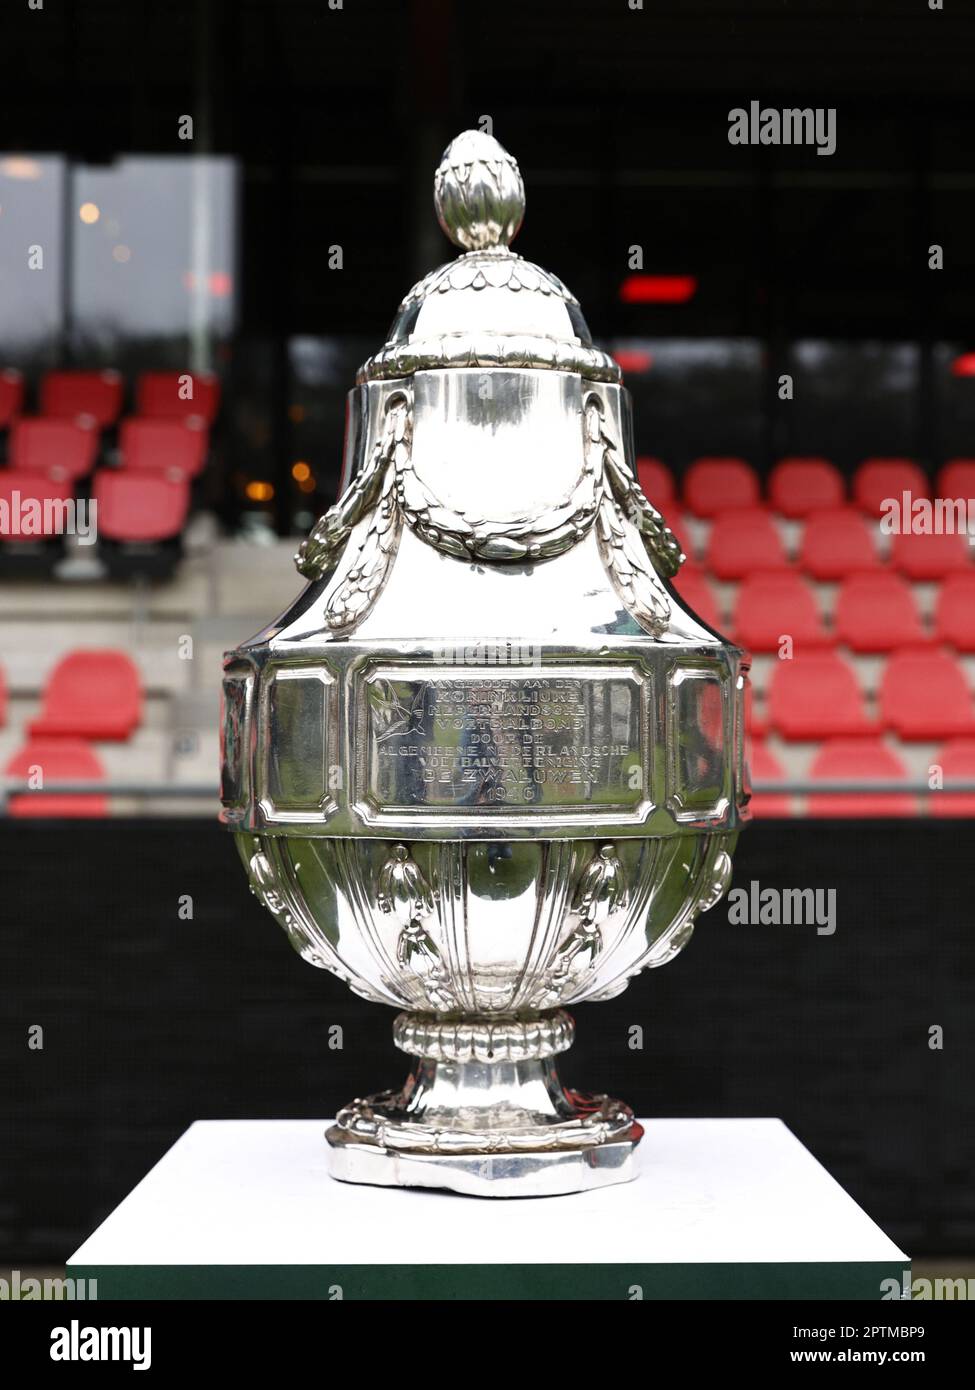 AMSTERDAM - 28/04/2023, EINDHOVEN - 28/04/2023, The KNVB Cup during the  press conference ahead of the KNVB Cup final against Ajax at PSV campus de  Herdgang on April 28, 2023 in Eindhoven,